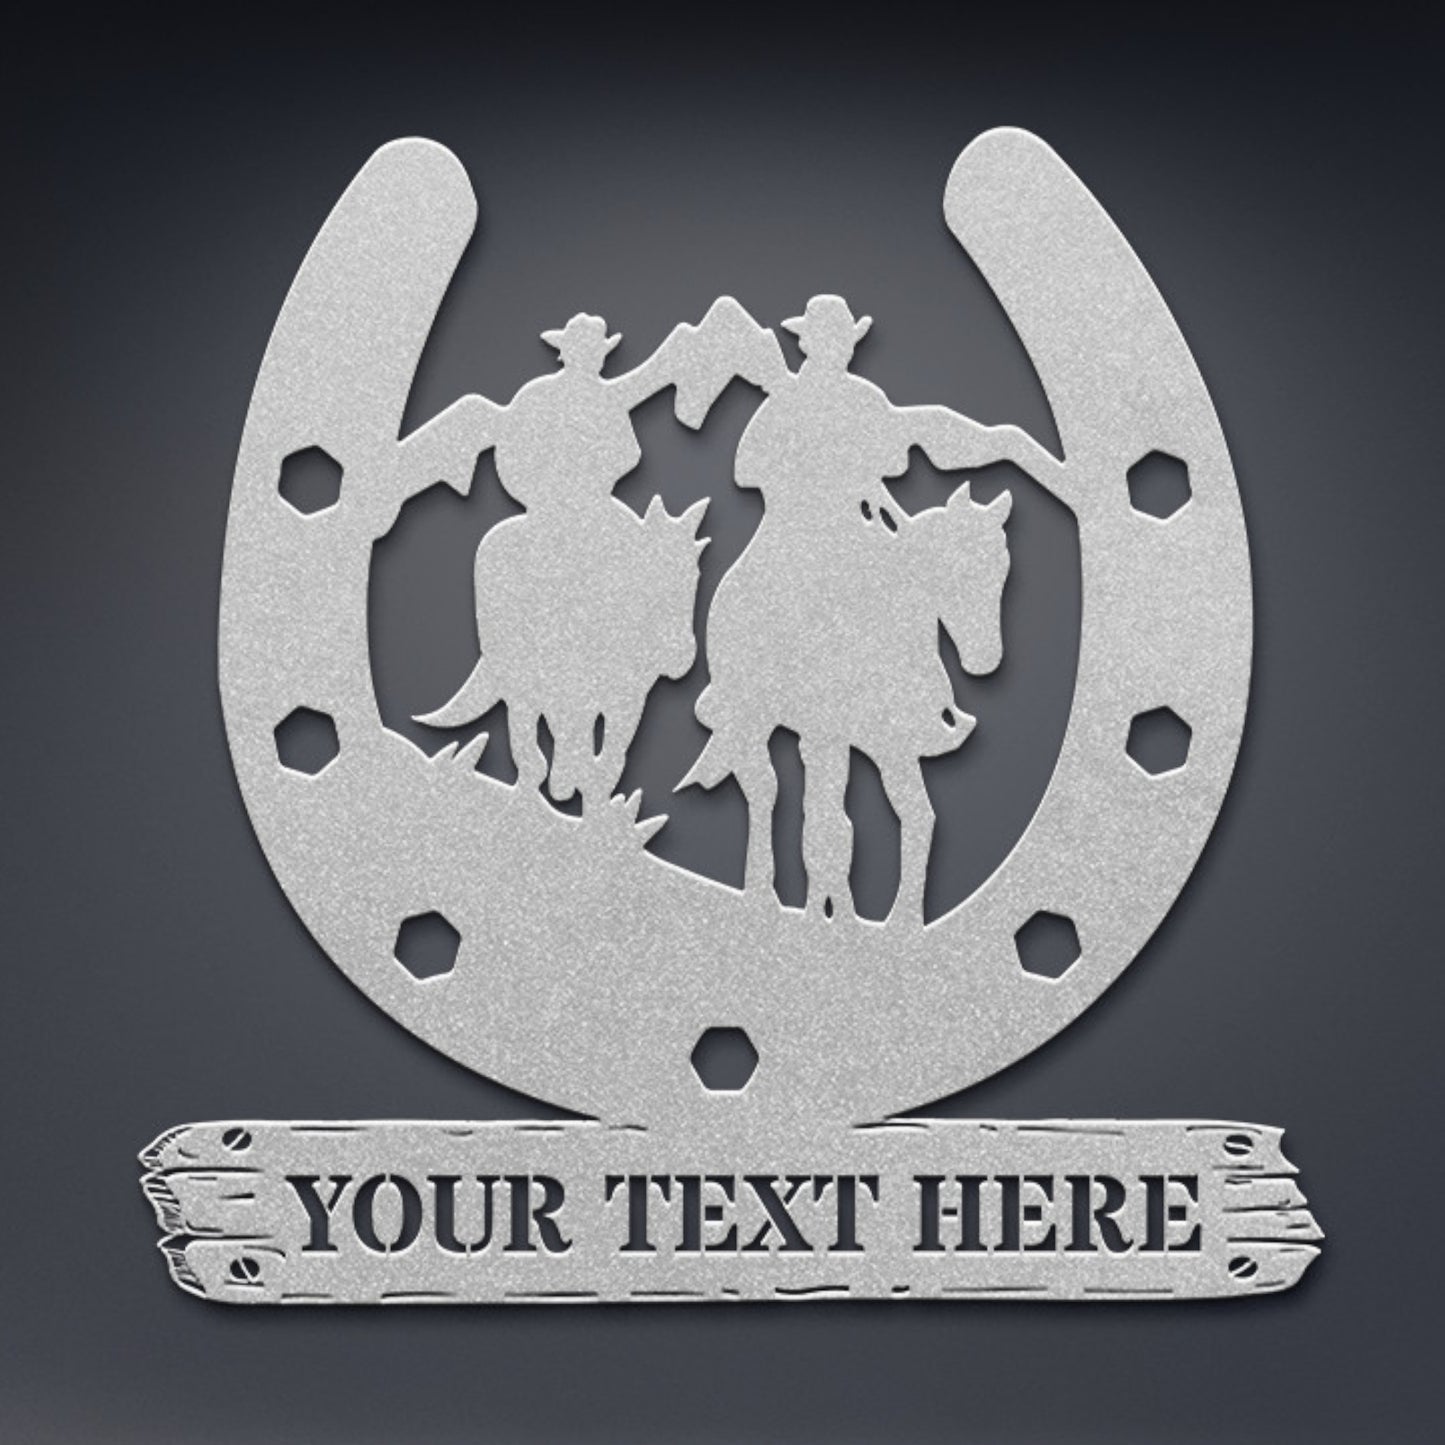 Personalized Horseriders Name Metal Sign Display. Custom Horseshoe Wall Decor Gift. Horse Riders Portrait. Customized Gifts For Horse Lovers